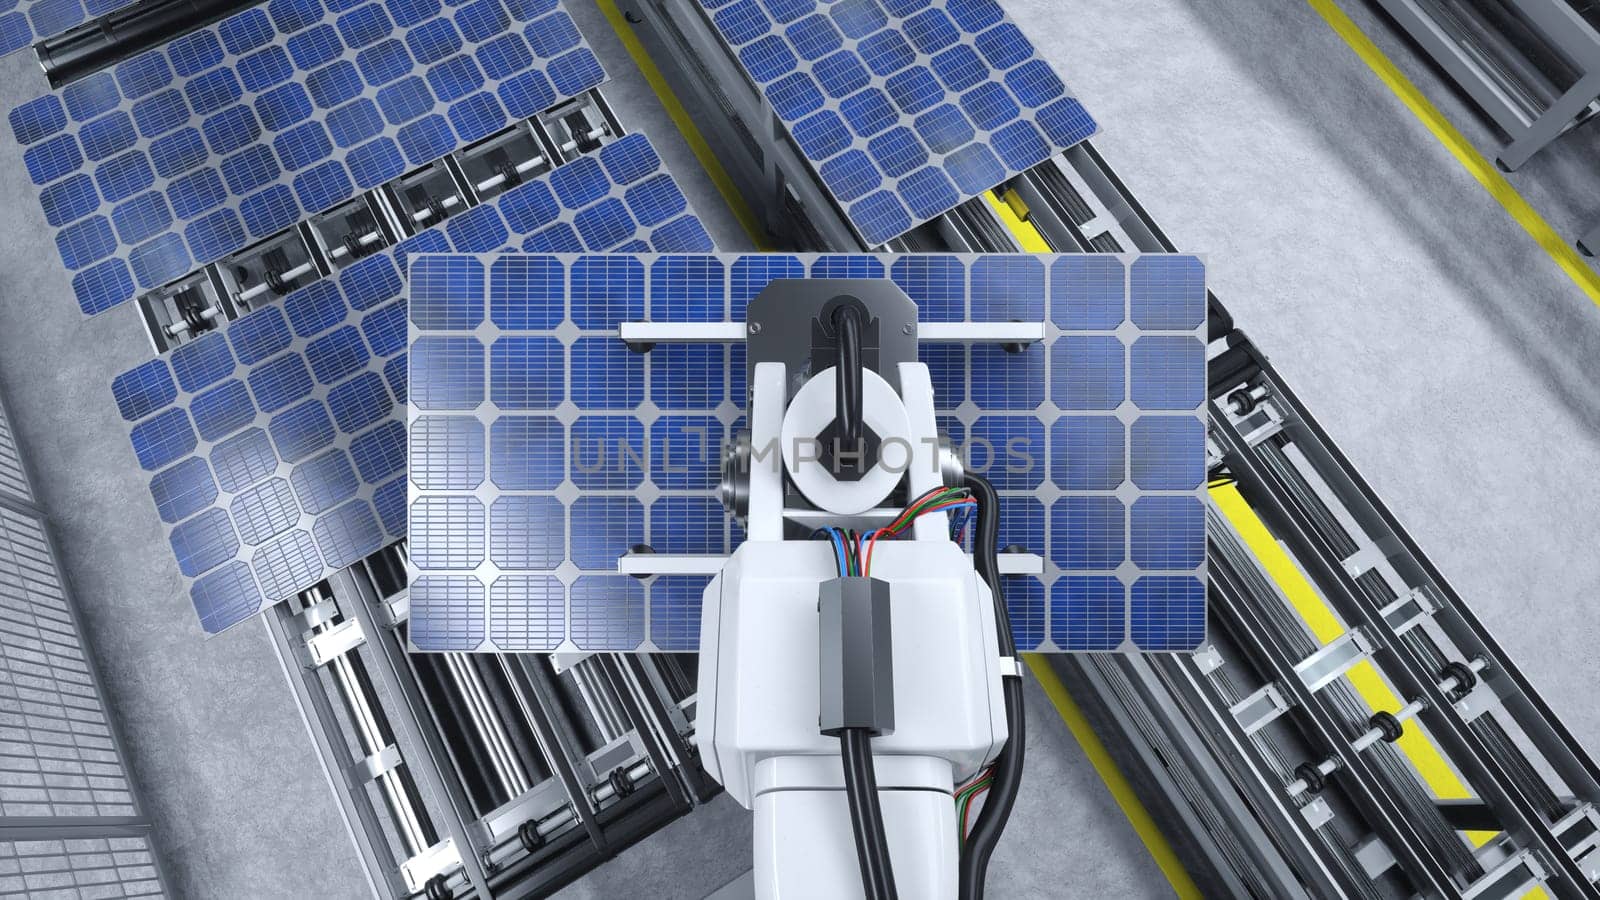 POV of robot arm moving solar panels on conveyor belts during automated production process in clean energy factory, 3D render. Machinery unit placing photovoltaic cells on assembly lines